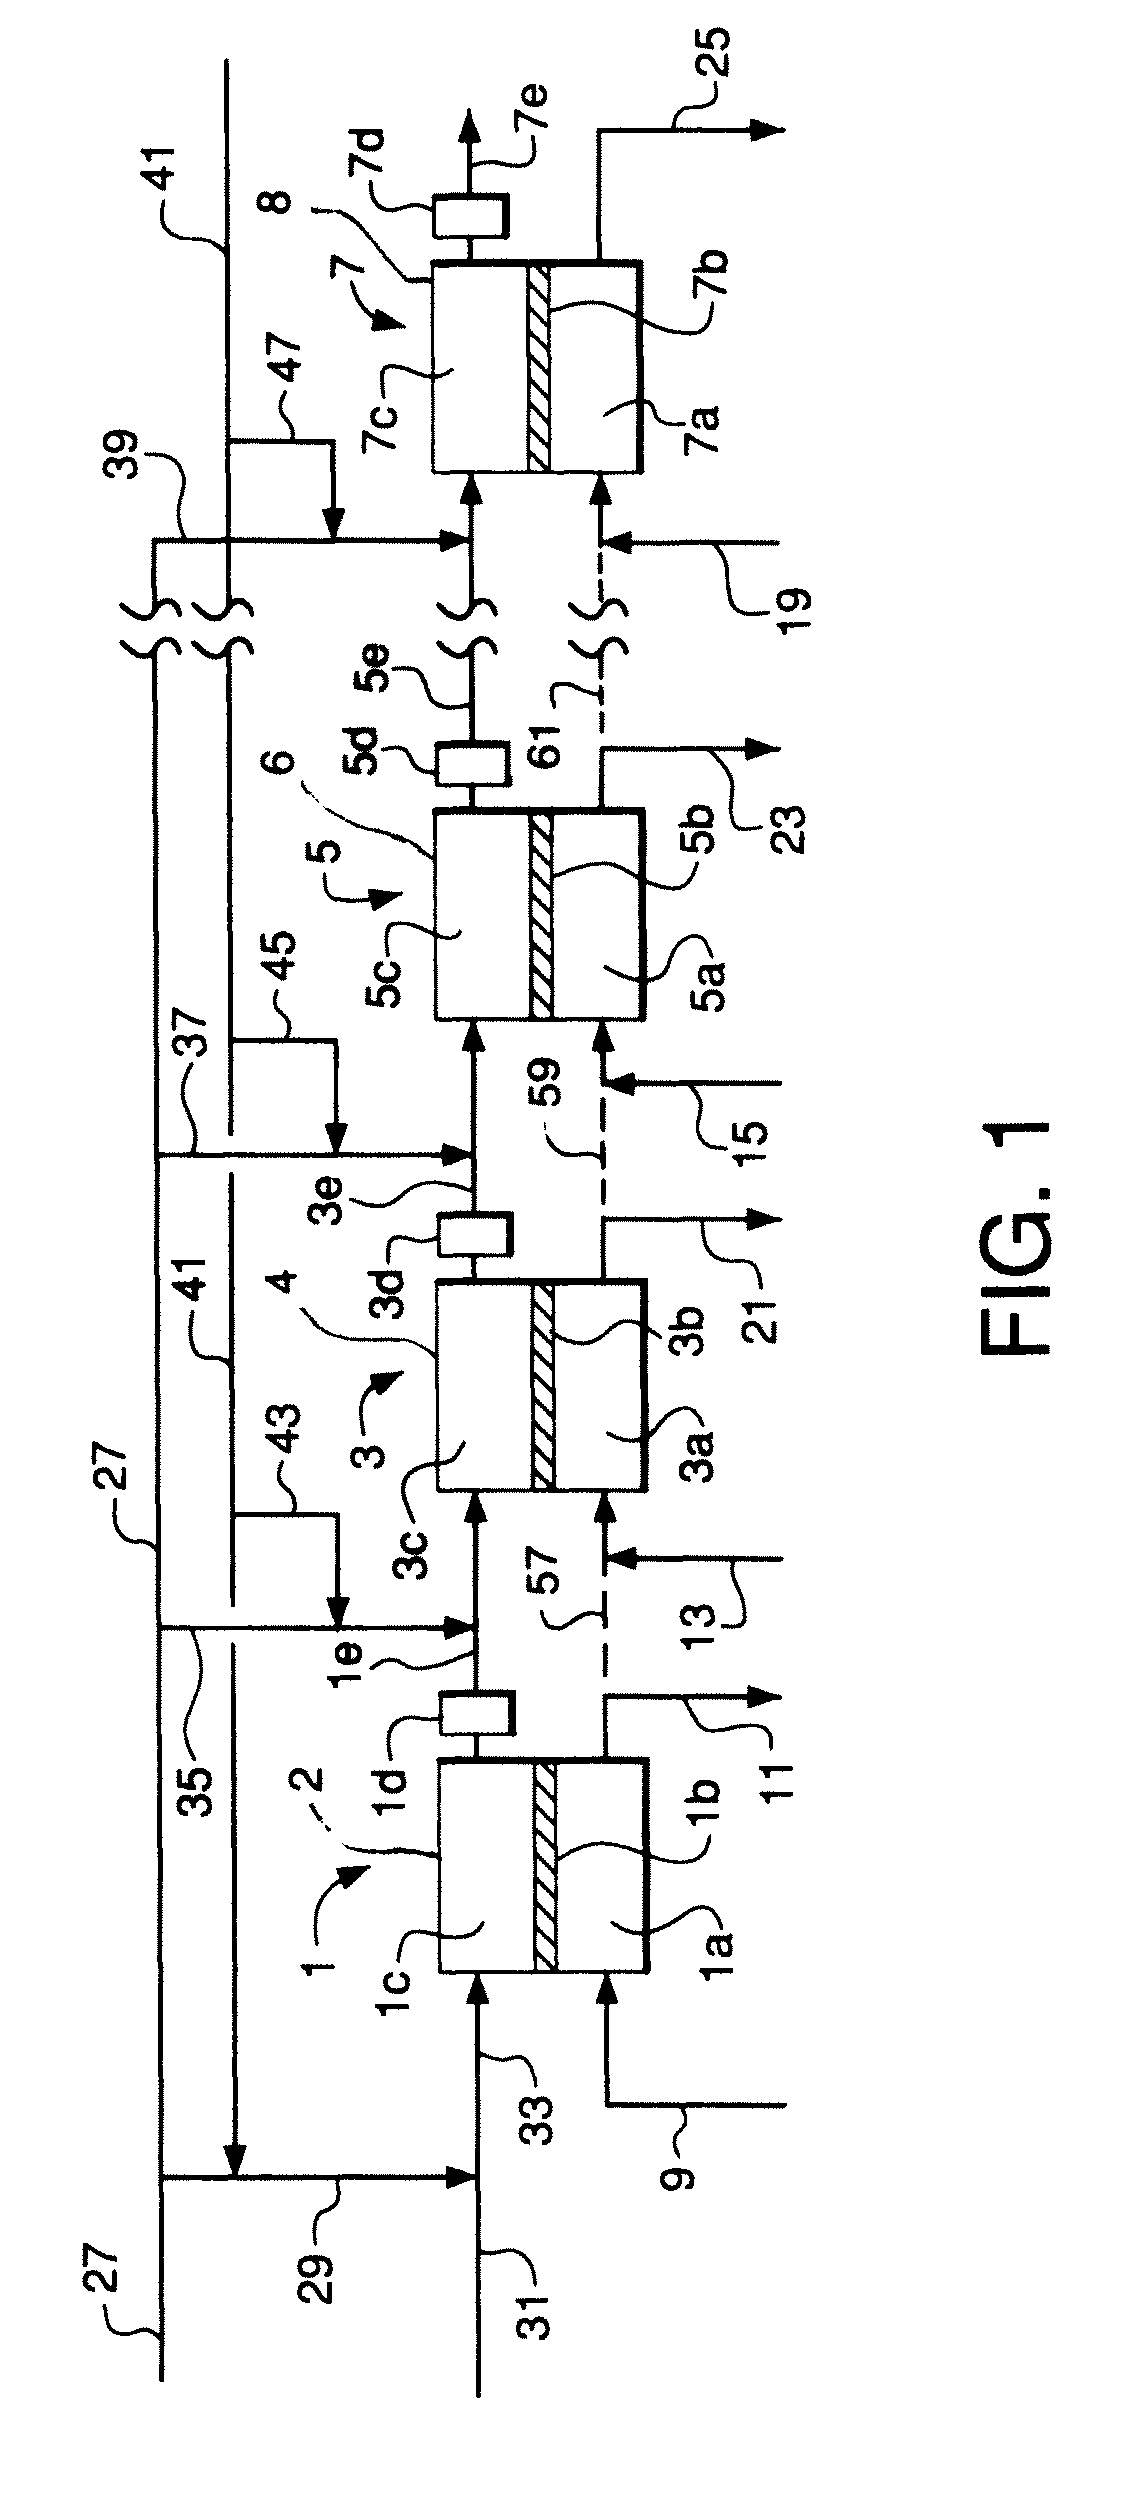 Staged membrane oxidation reactor system